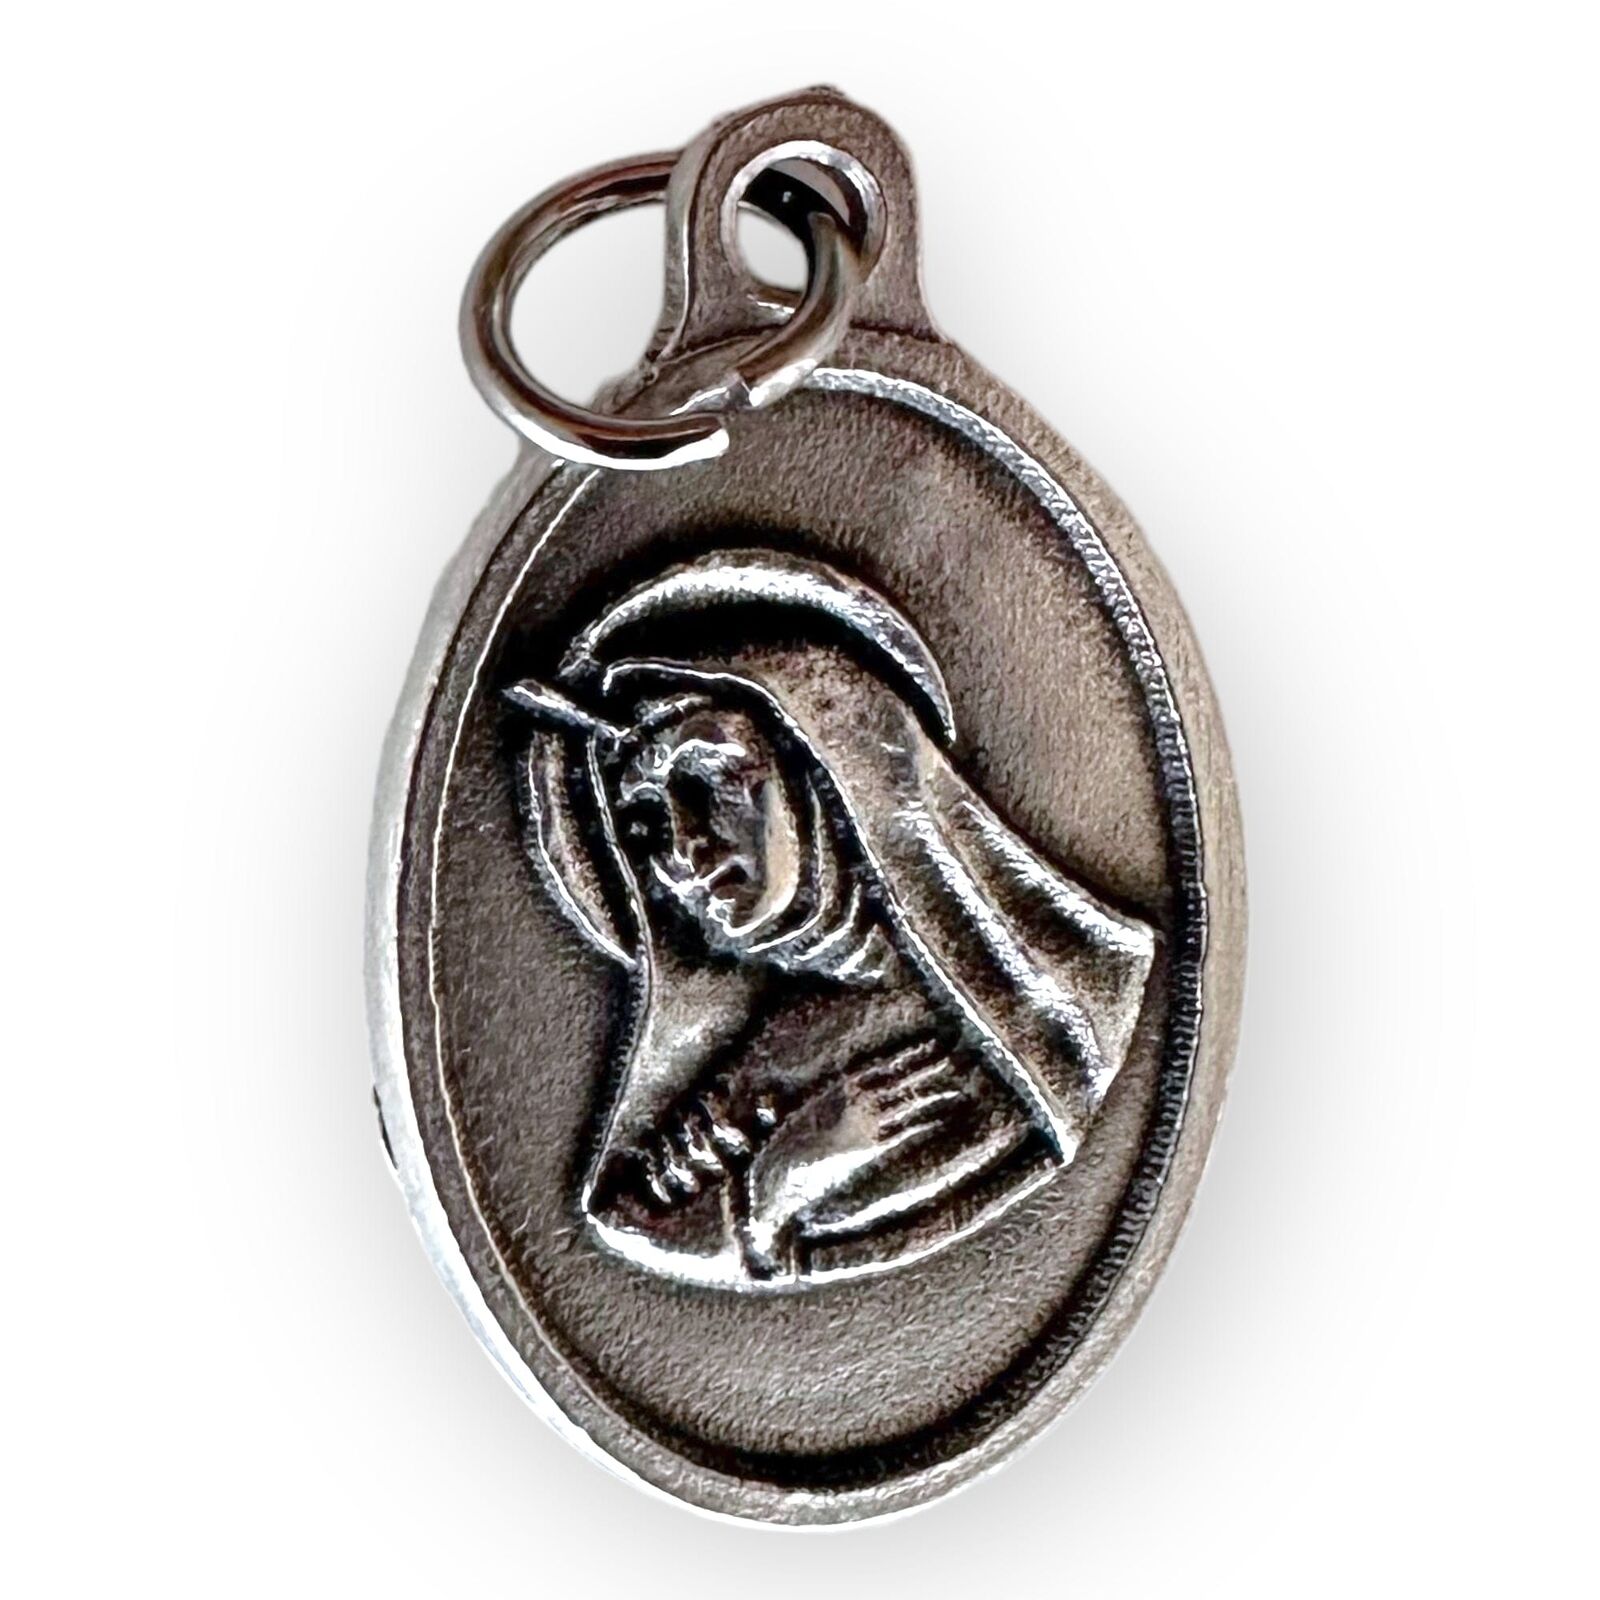 St. Rita Relic Medal - Patron of infertility and parenthood